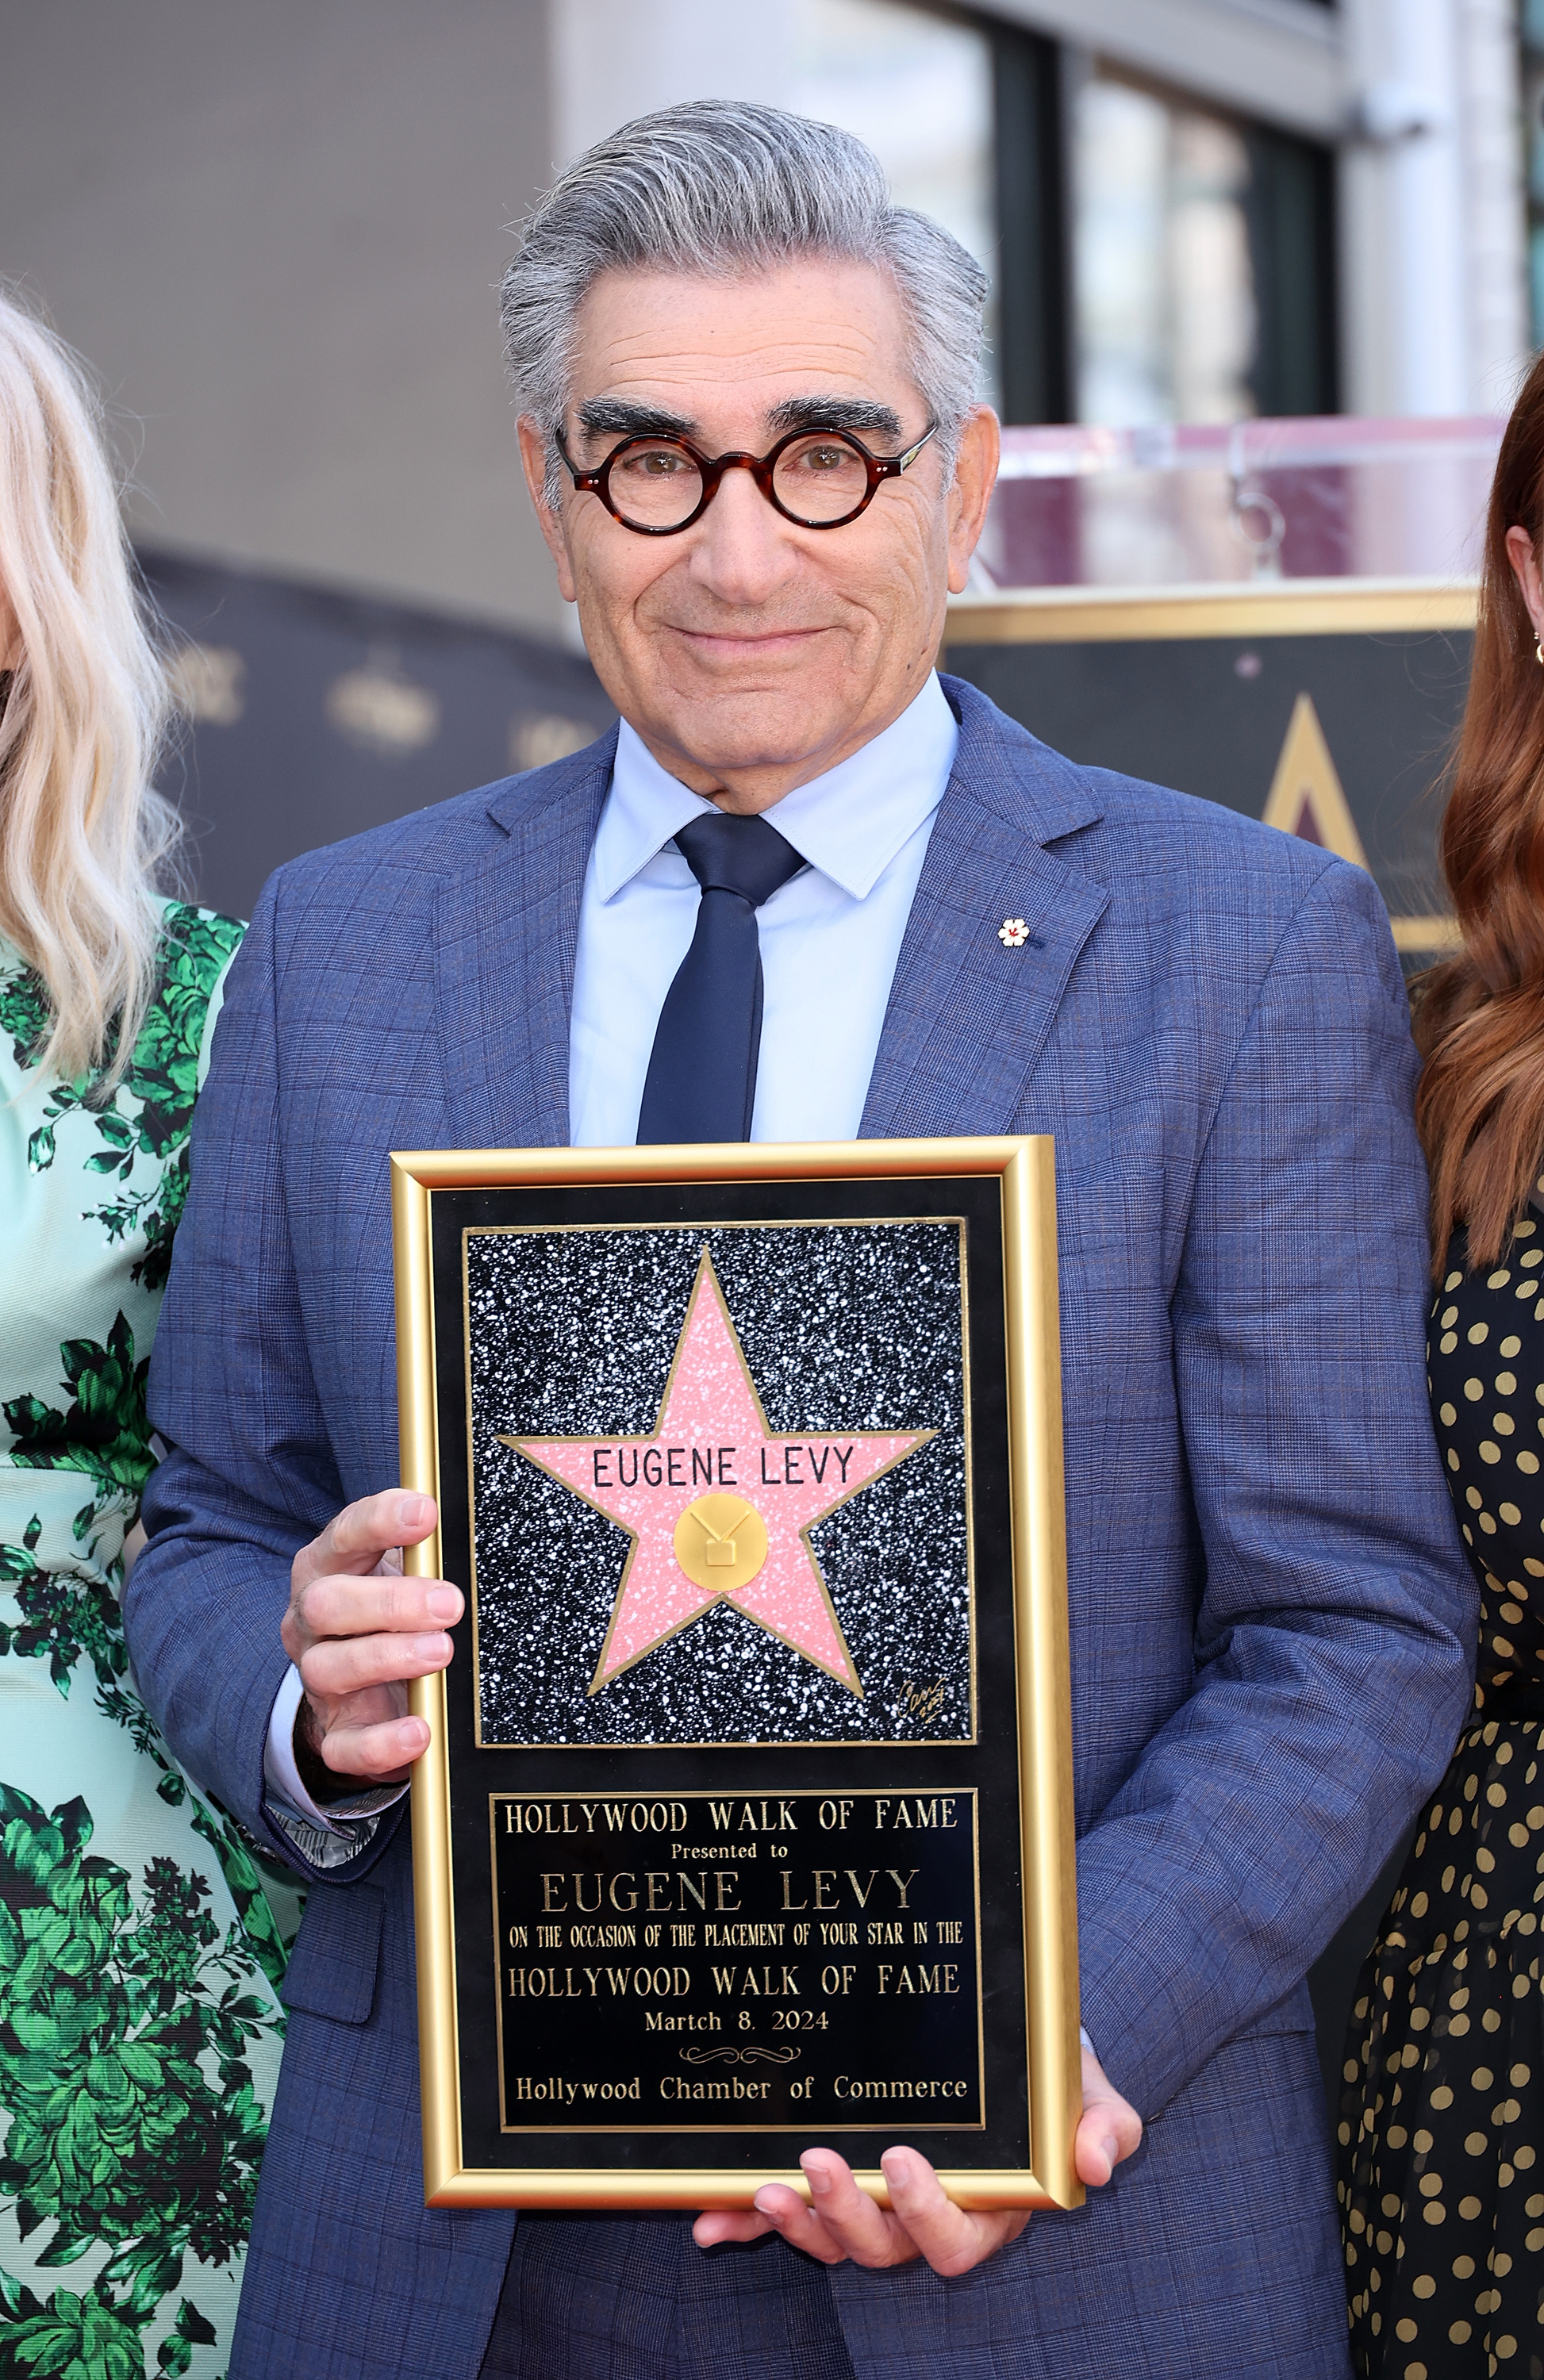 Eugene Levy in a suit holding his Hollywood Walk of Fame star plaque